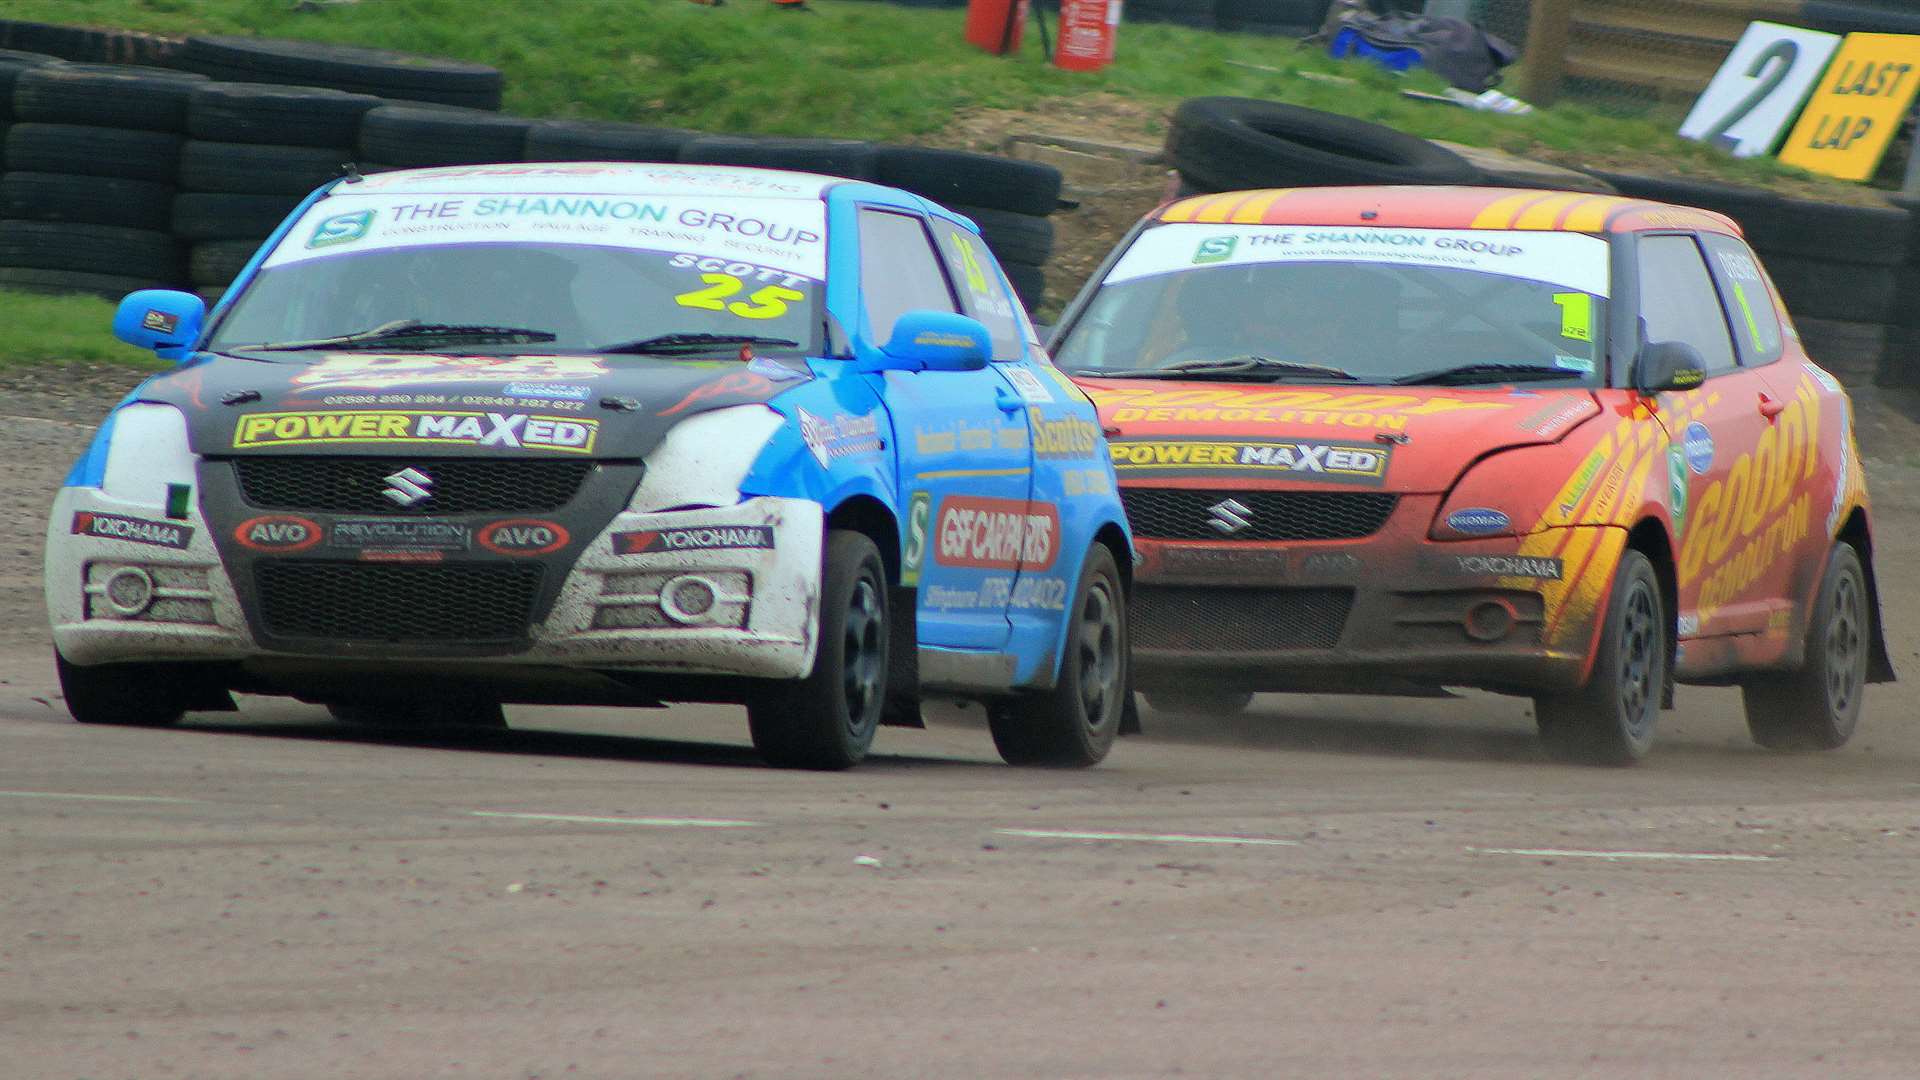 Darren Scott leads Tristan Ovenden home in the second heat at Lydden. Picture: Joe Wright